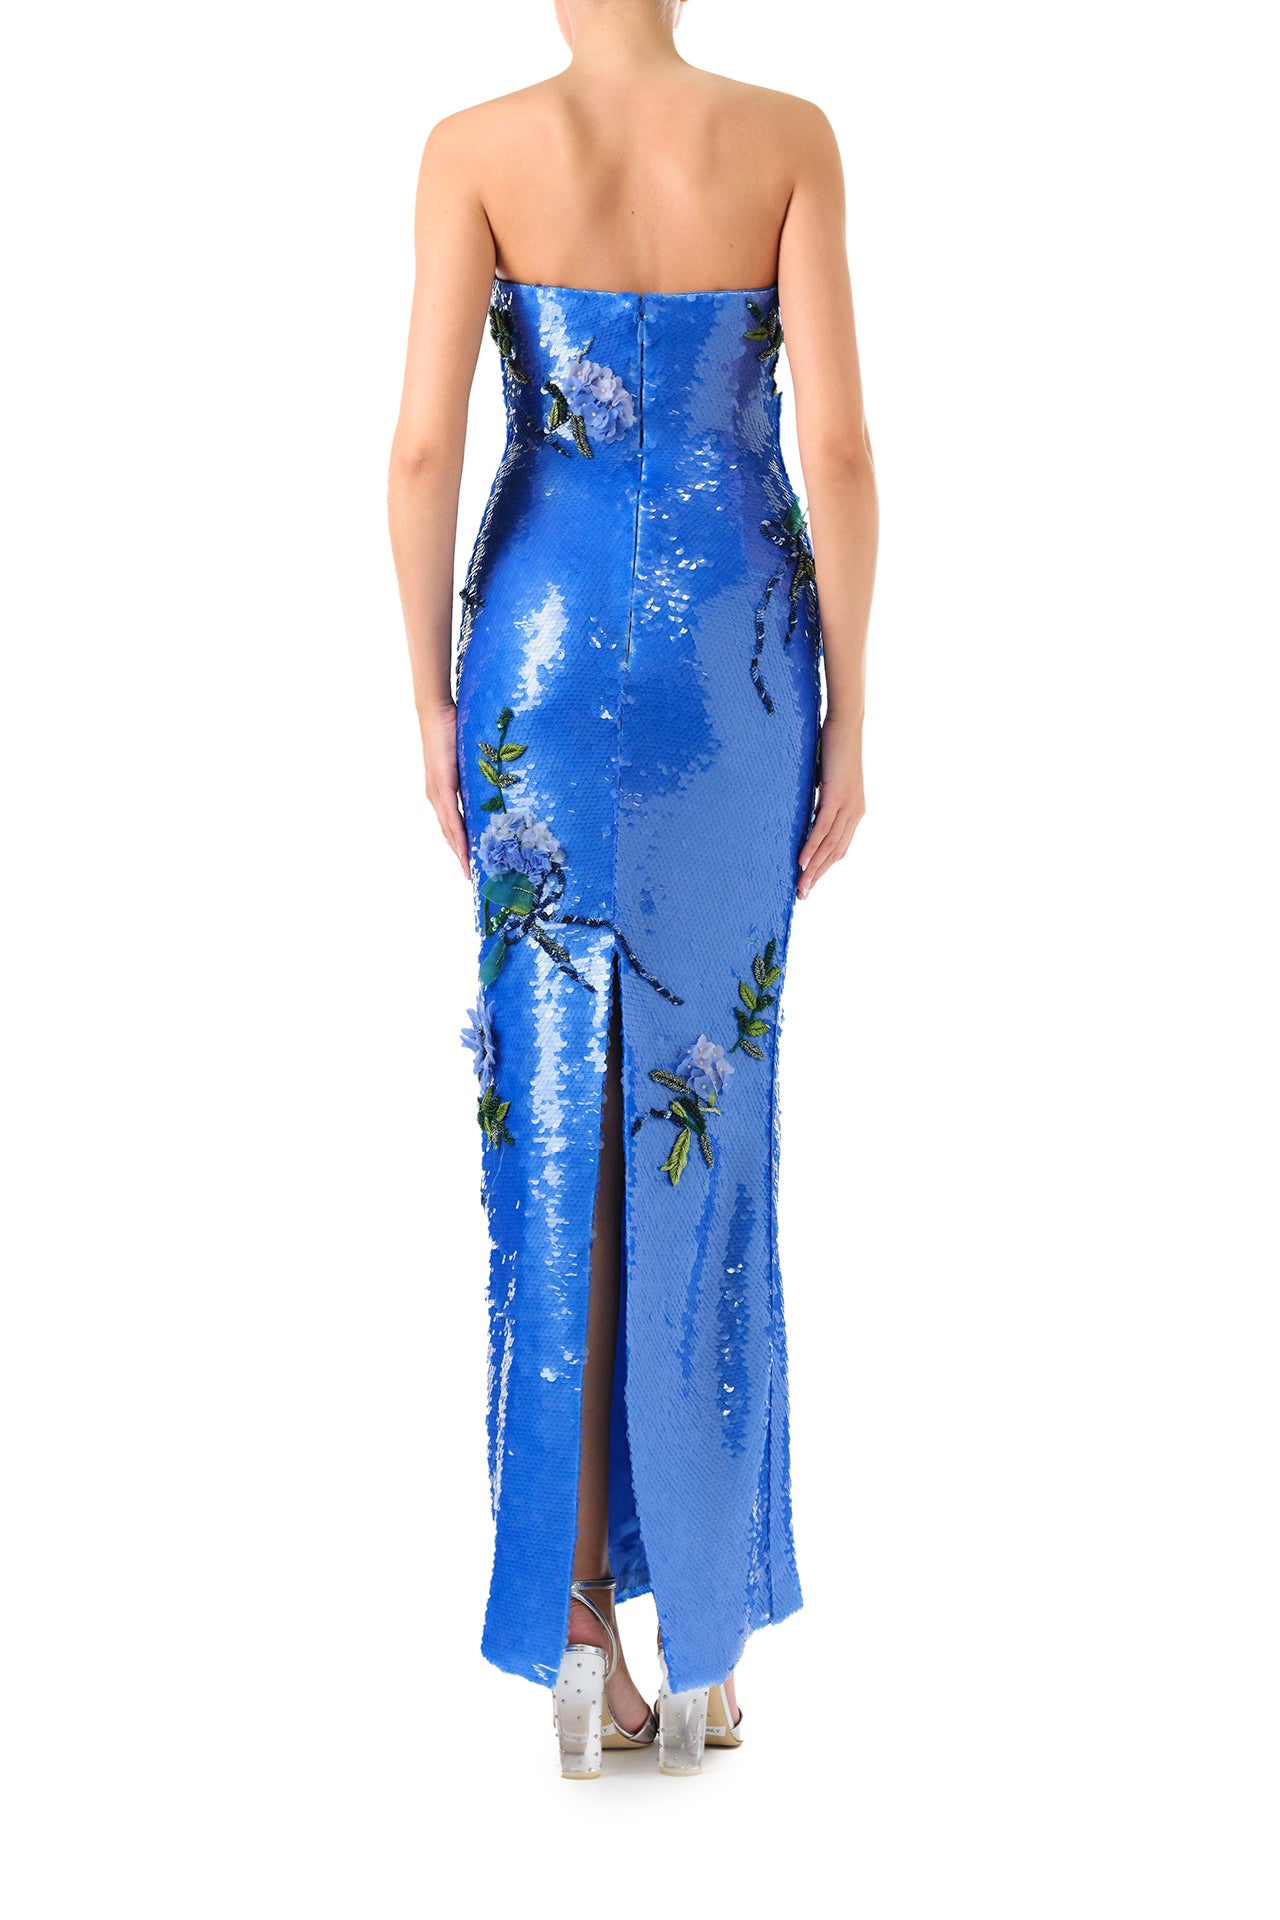 Monique Lhuillier Fall 2024 fitted, strapless column gown in Sky Blue sequin and Floral embroidery - back.